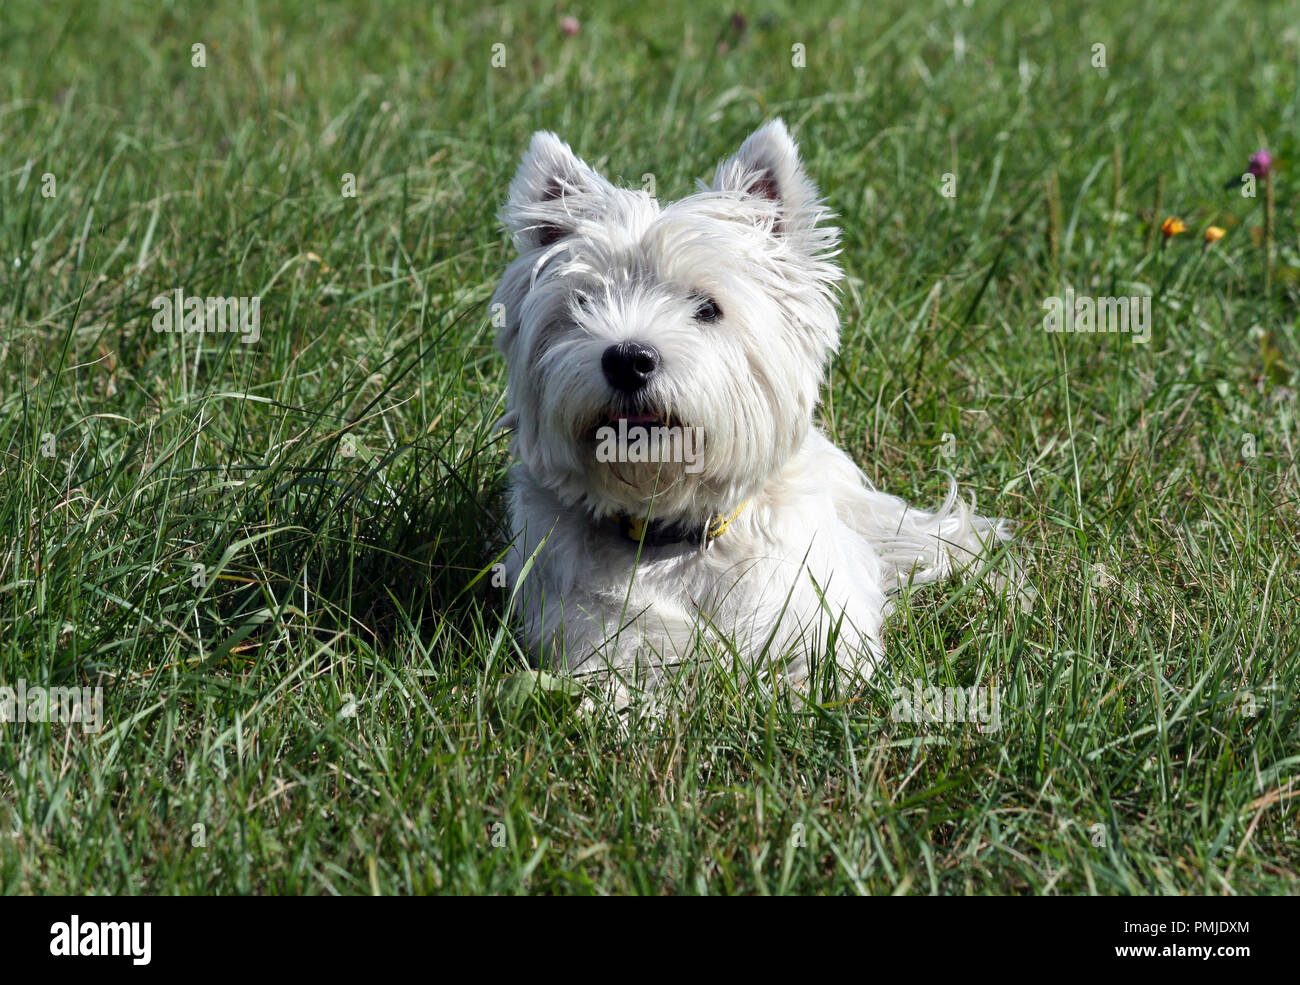 west highland white terrier dog breed, lies on the green grass in the evening on the nature, small black eyes looking away, white hair, cute animal, Stock Photo